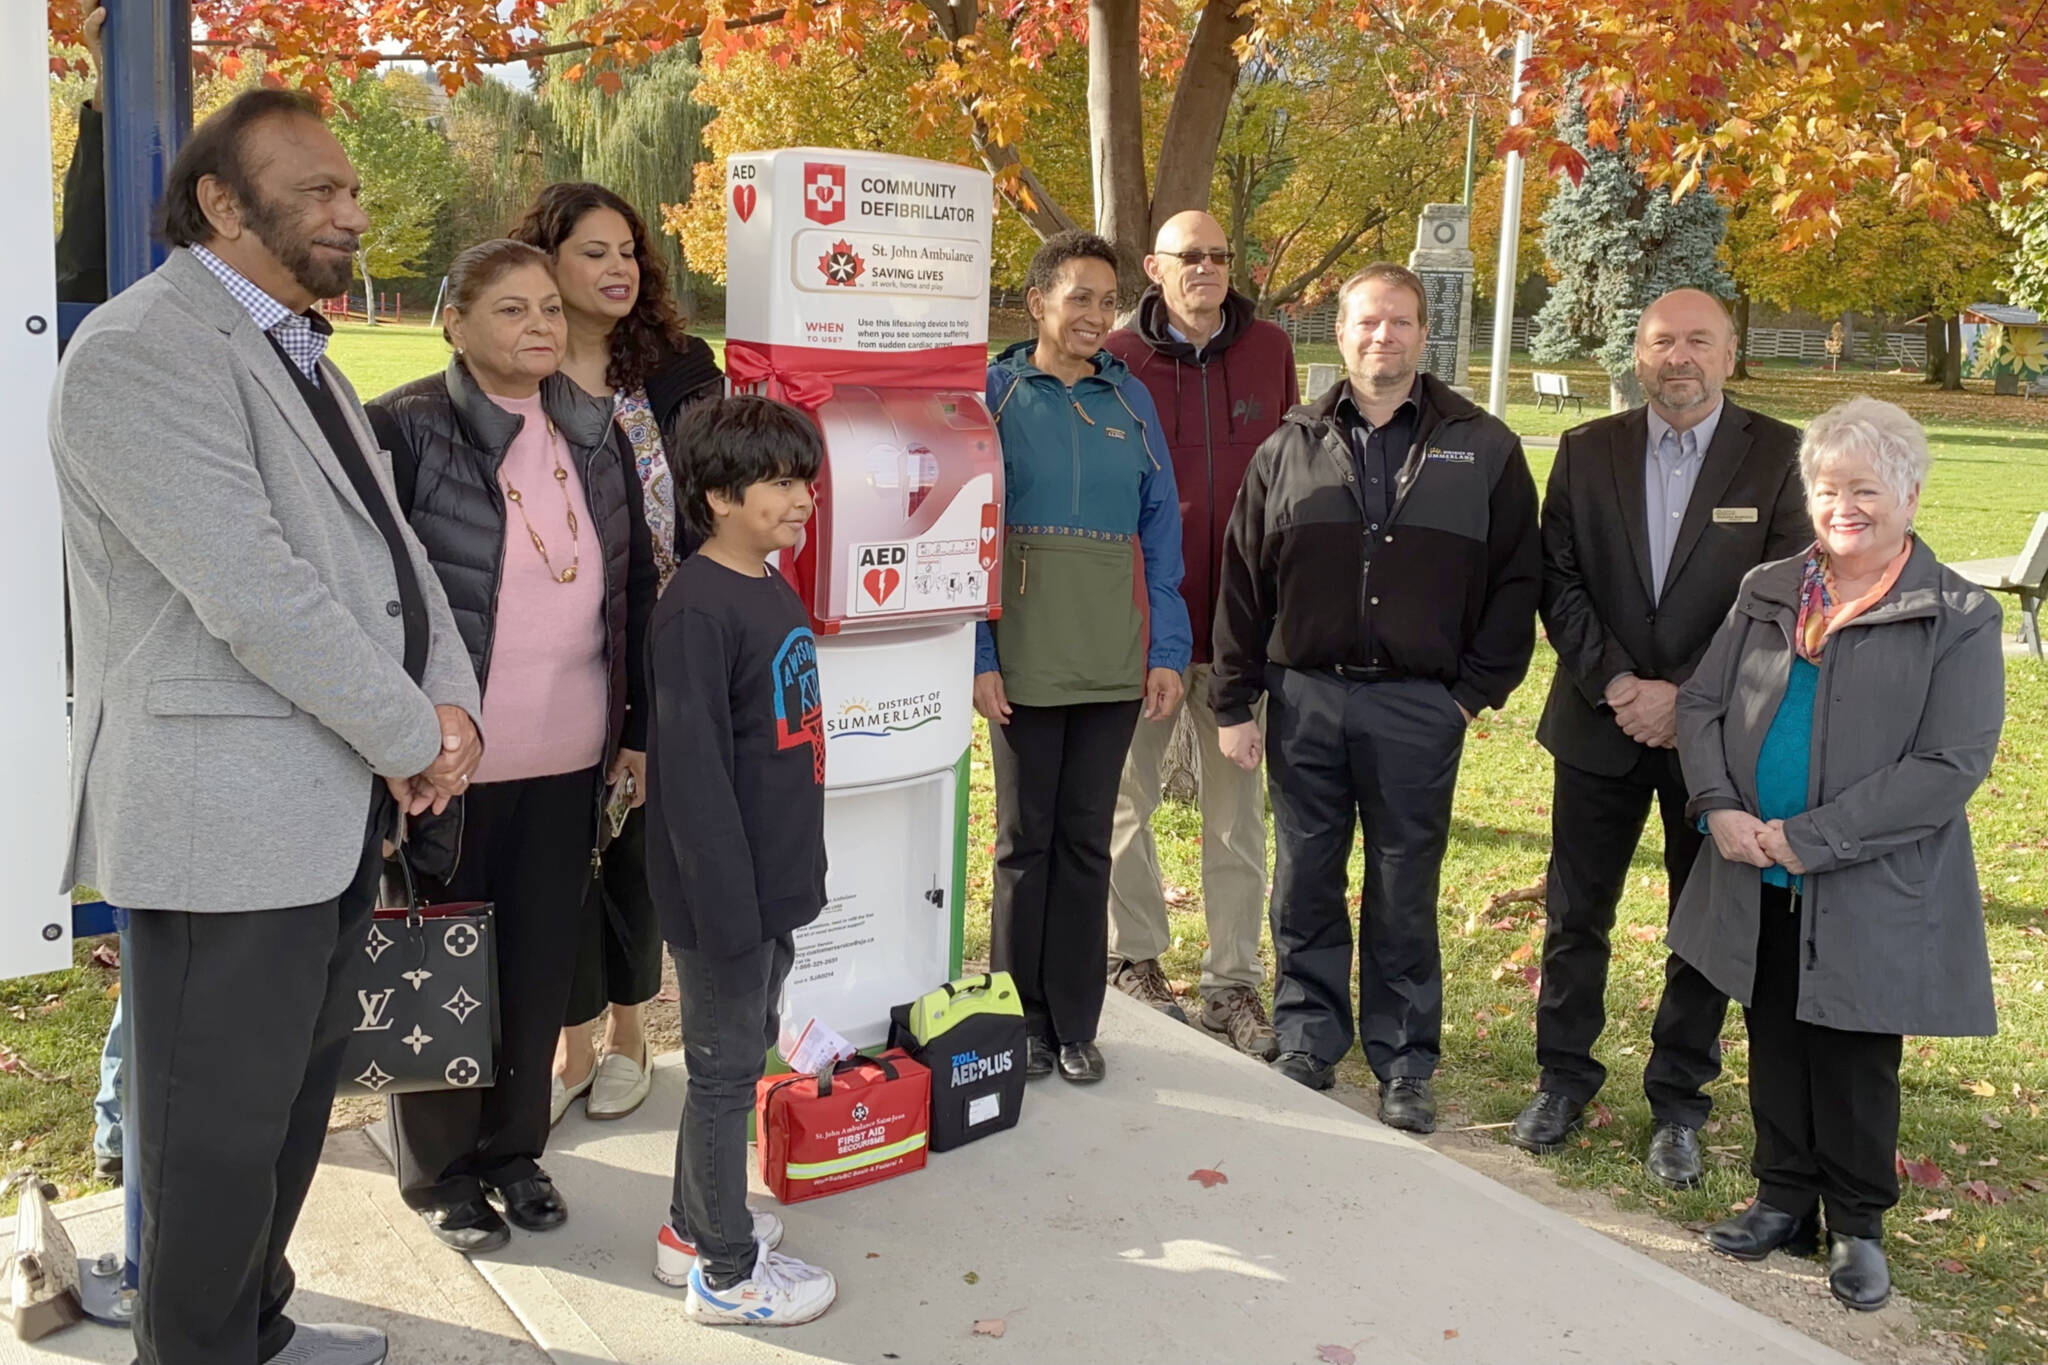 Al Klar, at left, donated an automated external defibrillator to the community of Summerland. With Klar are members of his family. To the right of the machine are Mayor Toni Boot, Mayor-elect Doug Holmes, bylaw officer Darren Krell, Coun. Richard Barkwill and Councillor-elect Janet Peake. (John Arendt - Summerland Review)